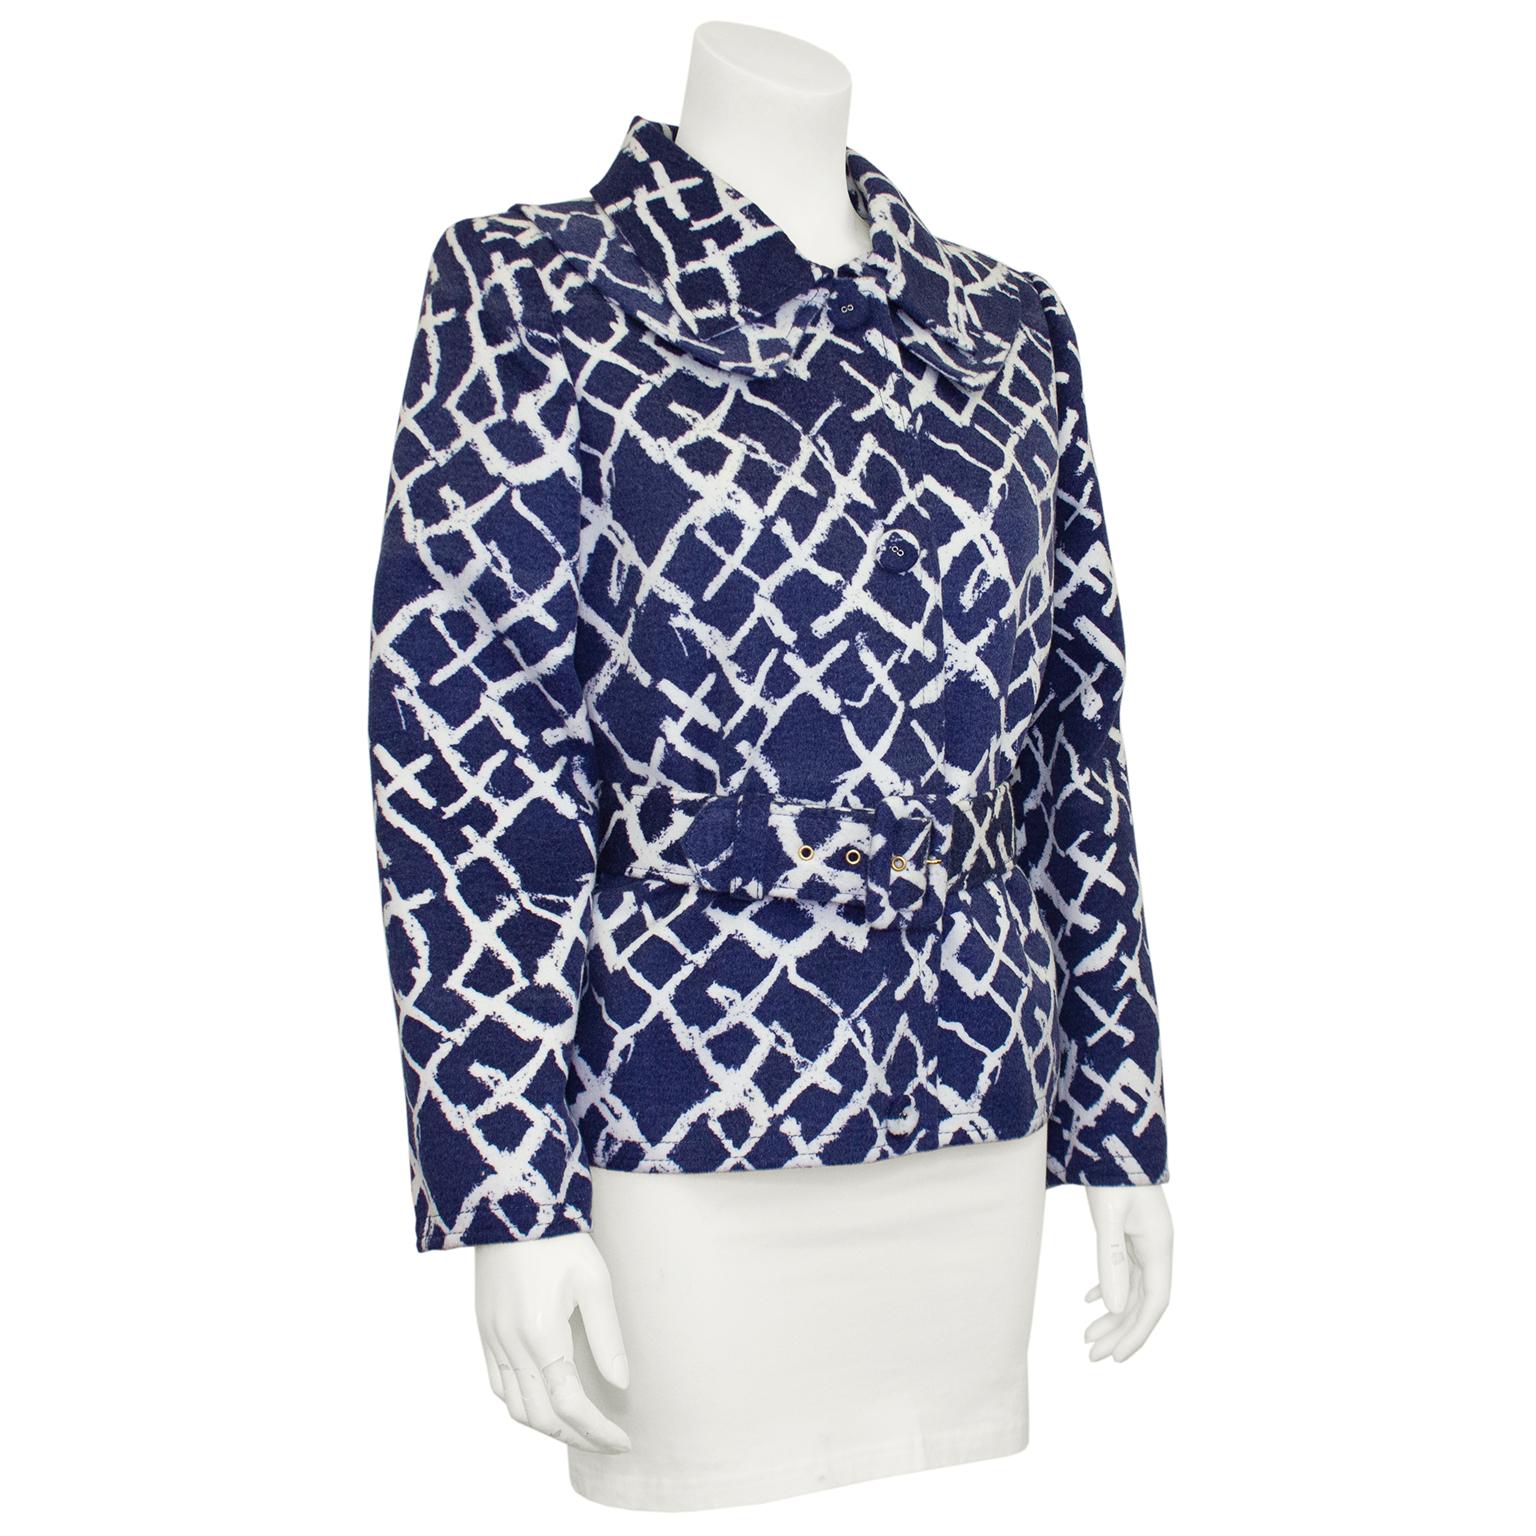 Lovely Oscar de la Renta jacket from the pre fall 2011 collection. Navy blue with all over abstract white 'x' pattern. Unique layered double collar detail and snap buttons down the centre. Strong shoulders with interior shoulder pad. Can be worn